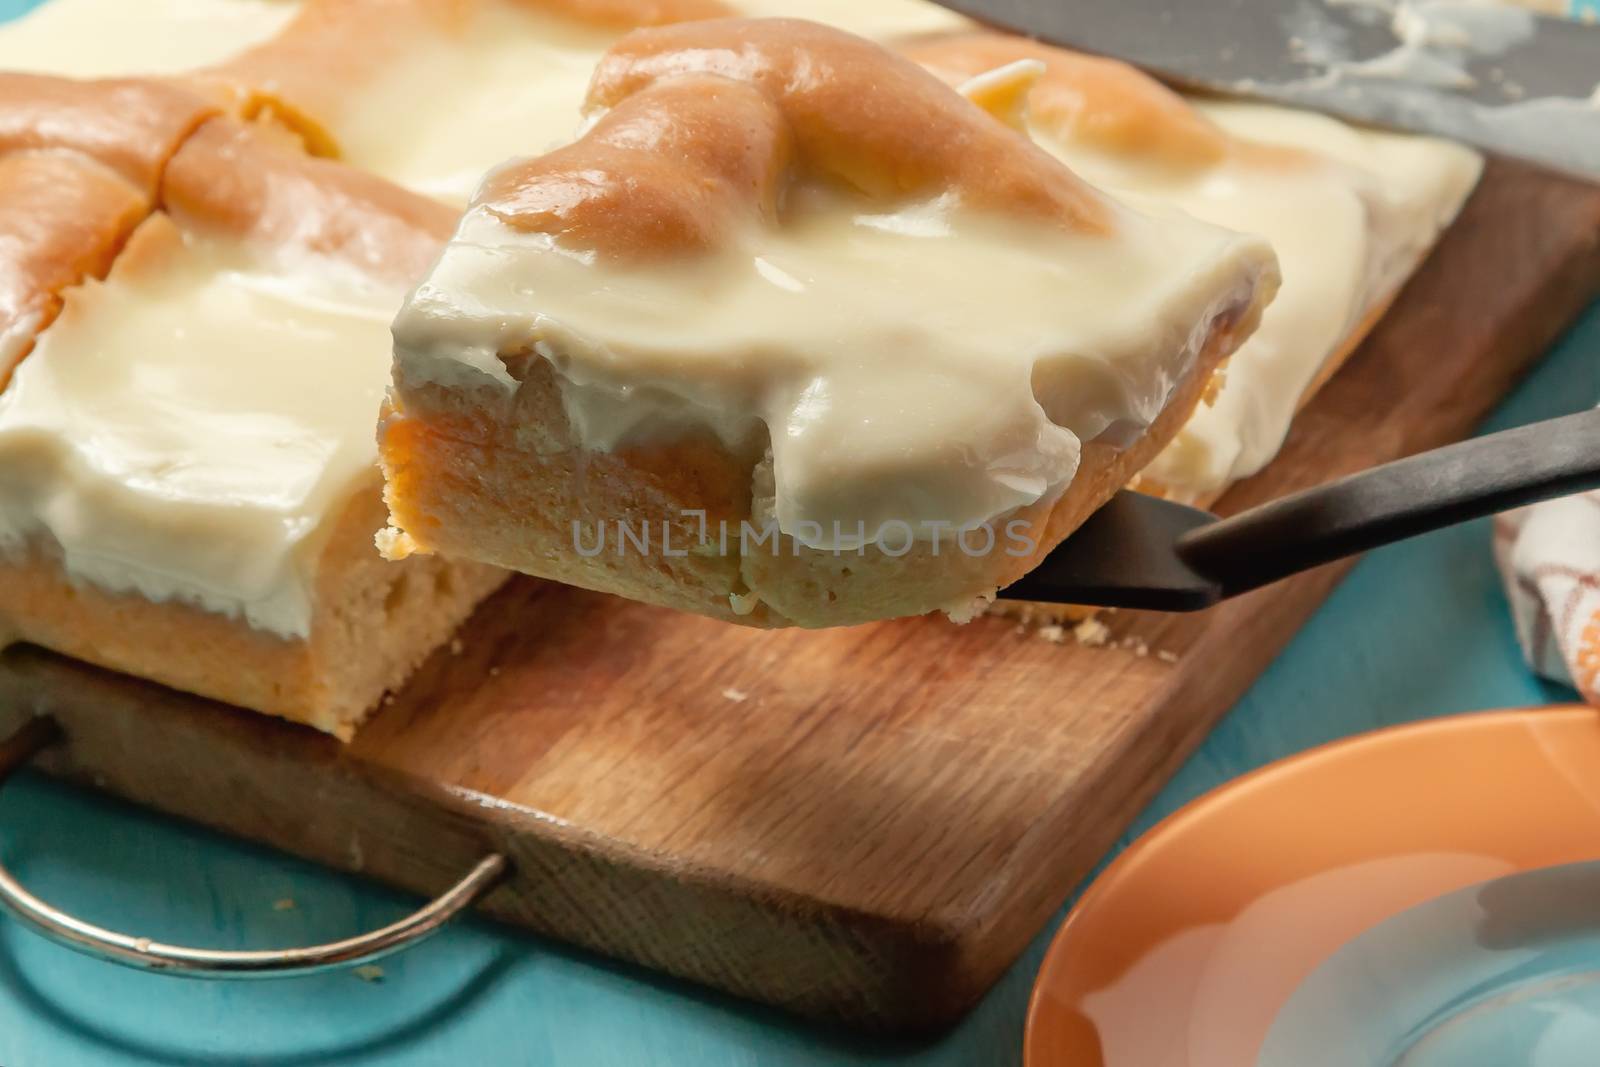 Sliced Apple Pie with Sour Cream on Wooden Cutting Board - photo, image by galsand